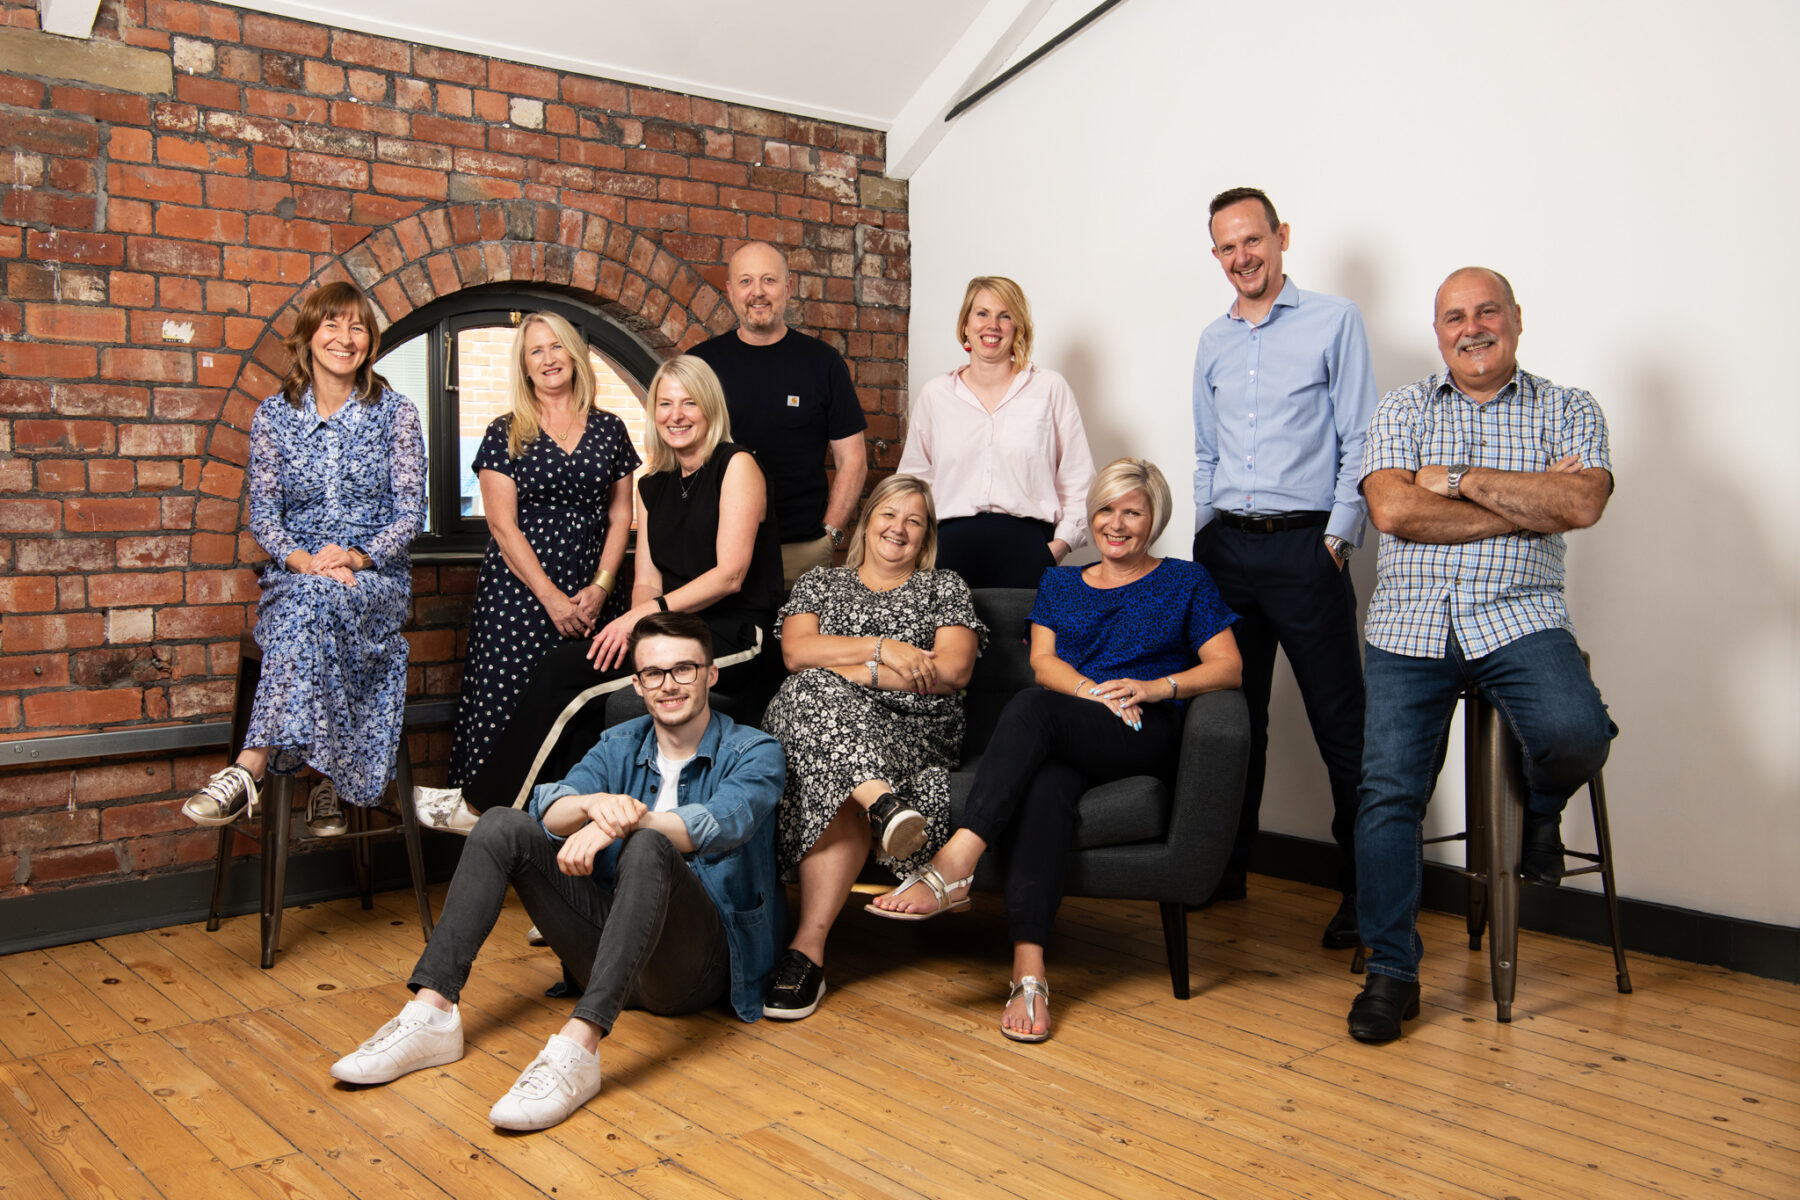 Showcasing the LeedsBID team with a unique set of images